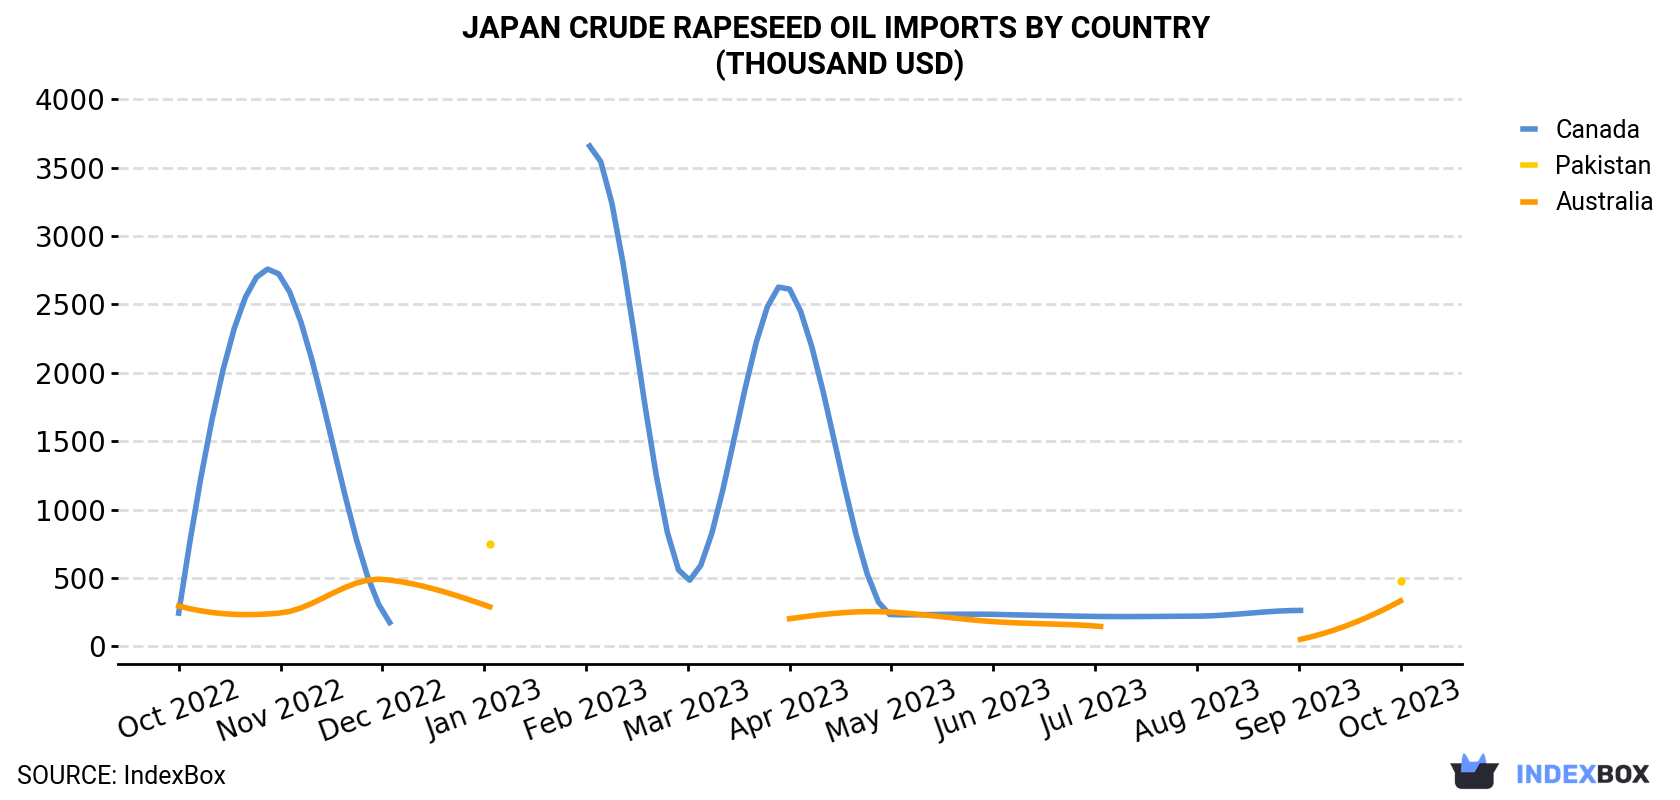 Japan Crude Rapeseed Oil Imports By Country (Thousand USD)